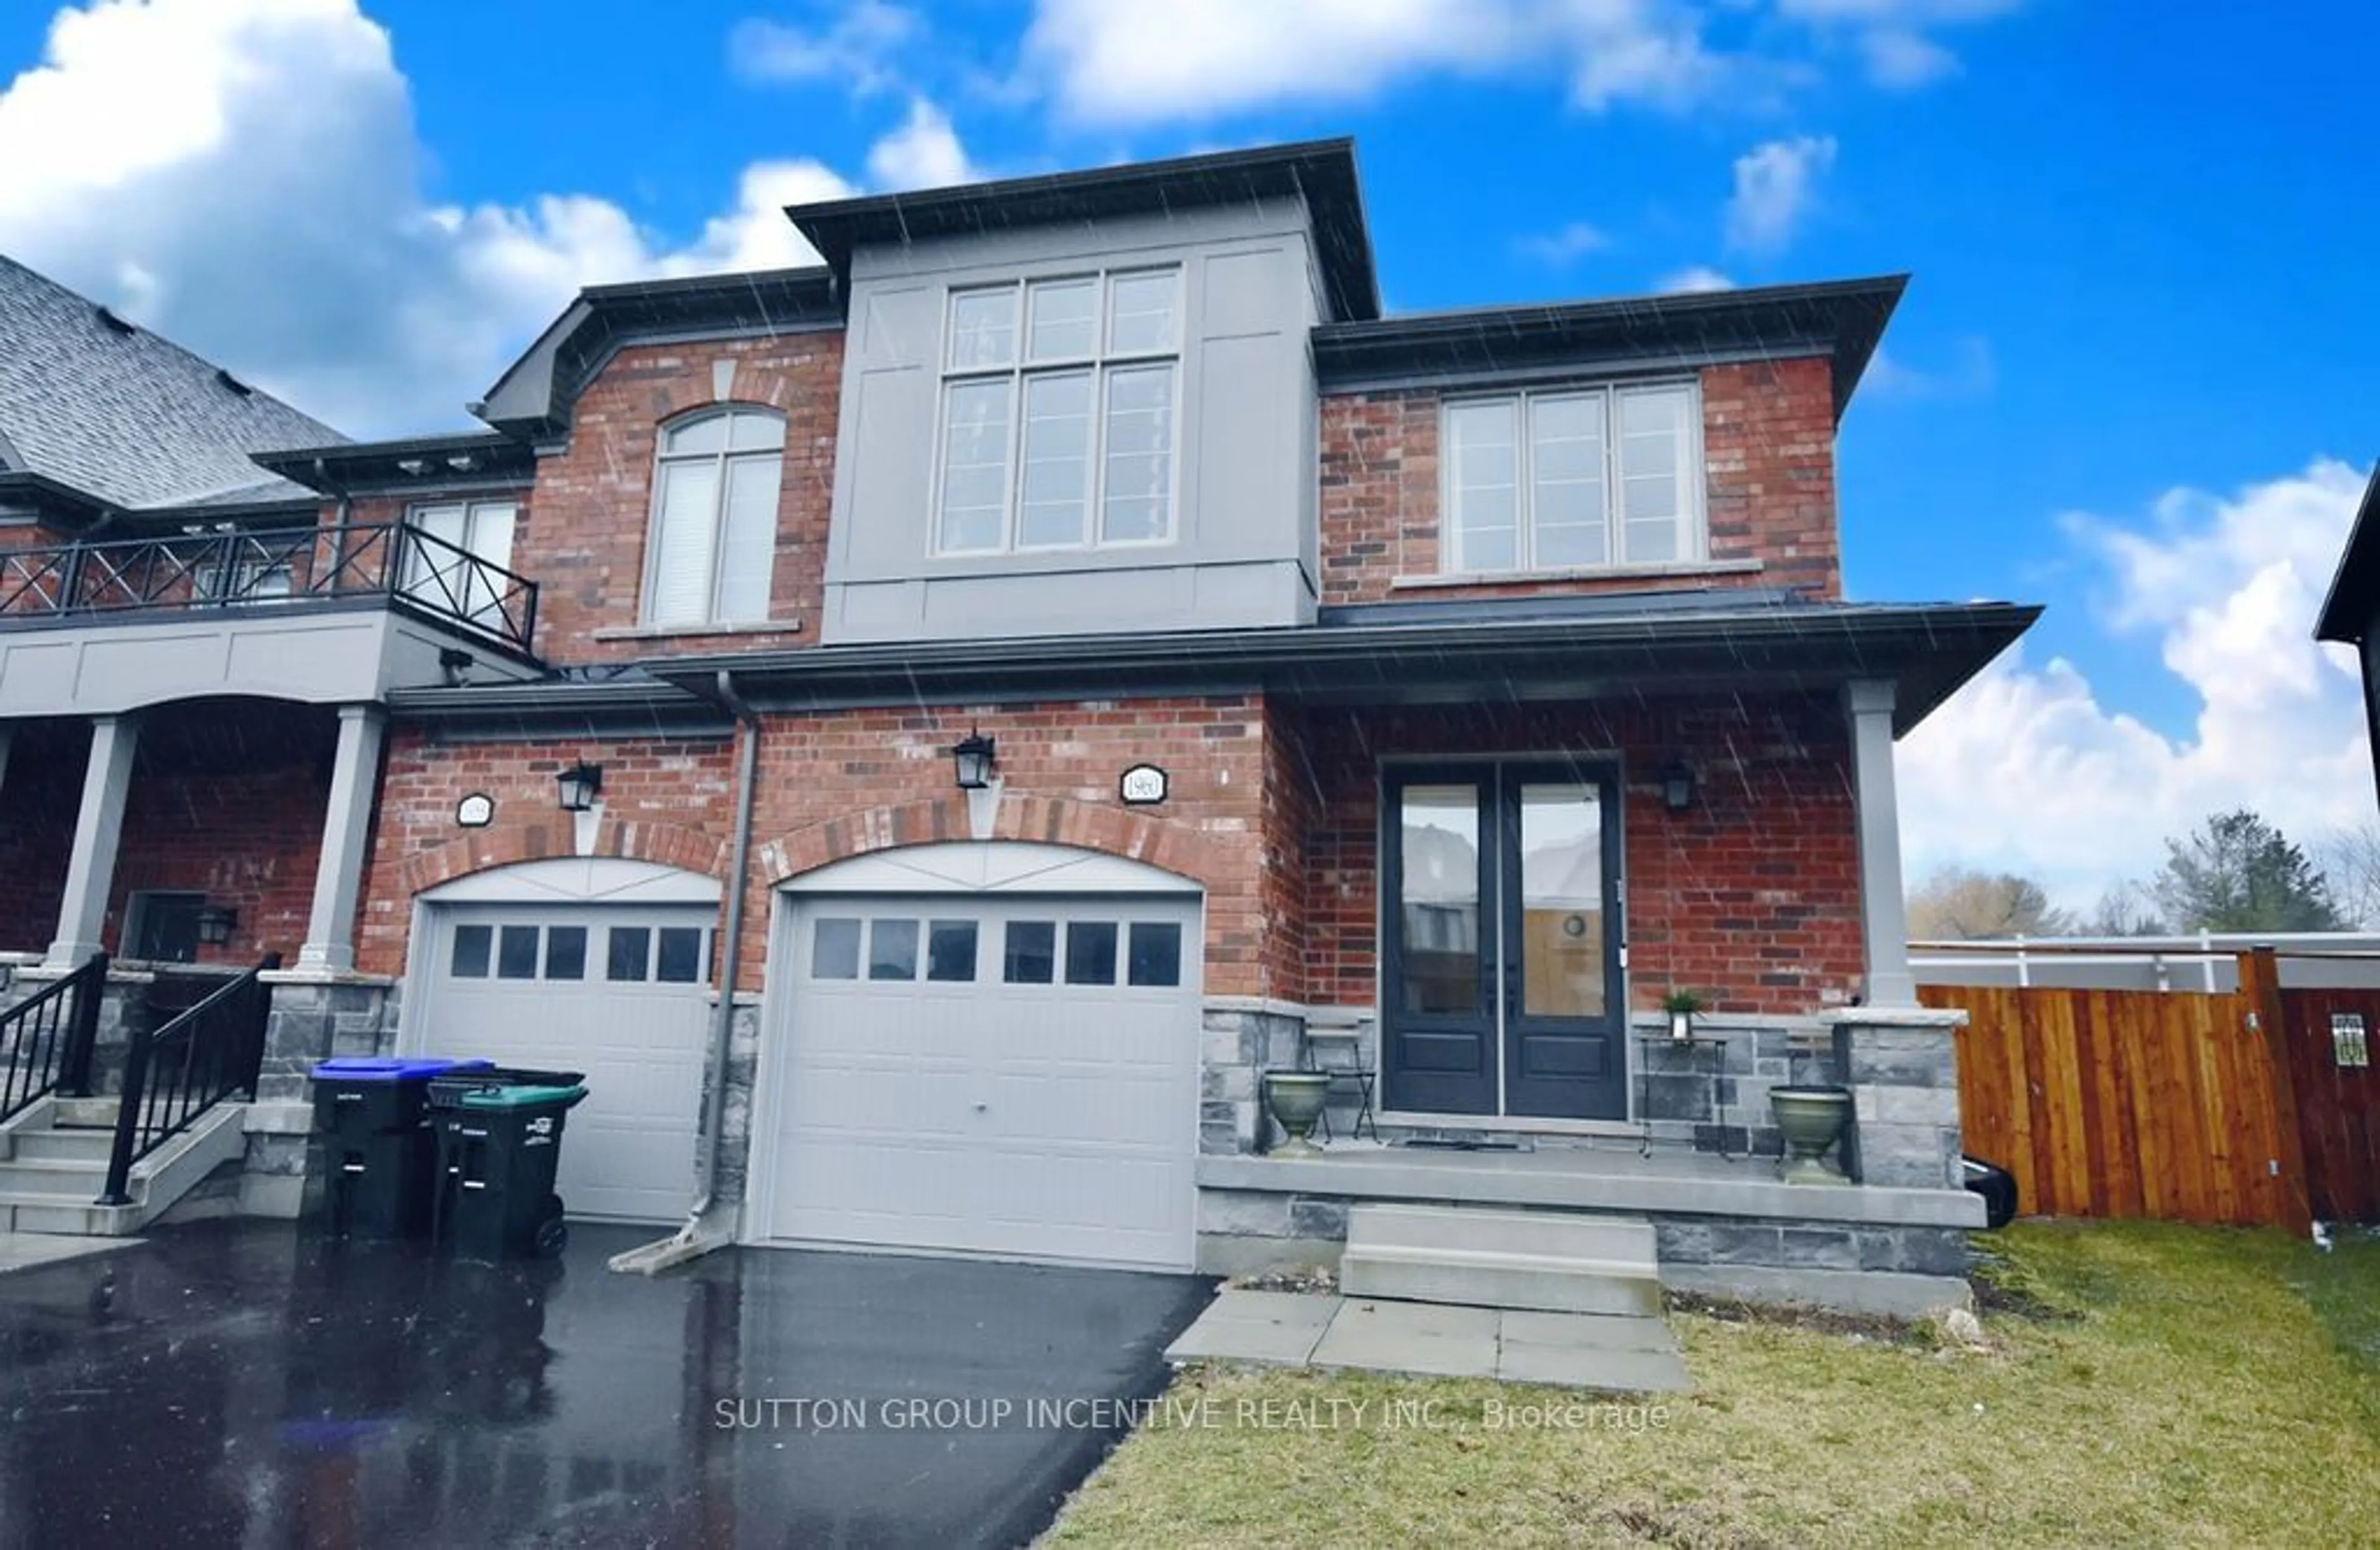 Home with brick exterior material for 1960 Mcneil St, Innisfil Ontario L9S 0N7